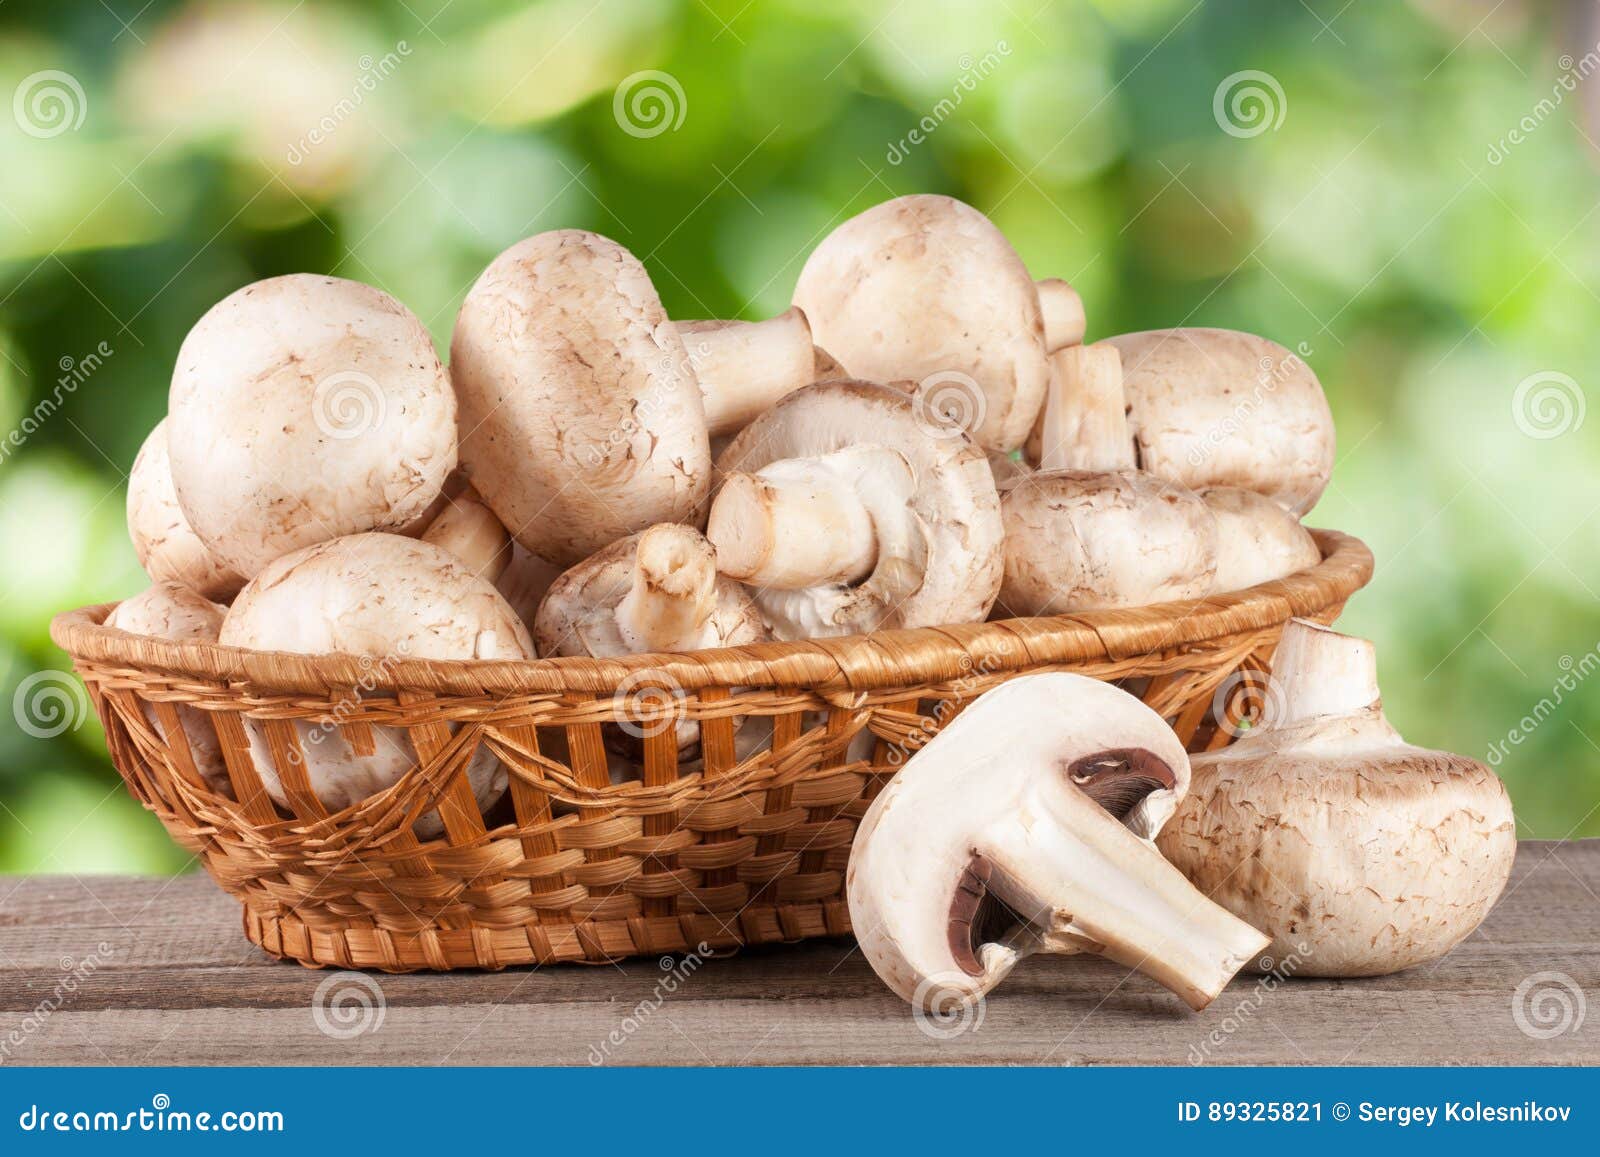 Champignon Mushrooms In A Wicker Basket On Wooden Table With